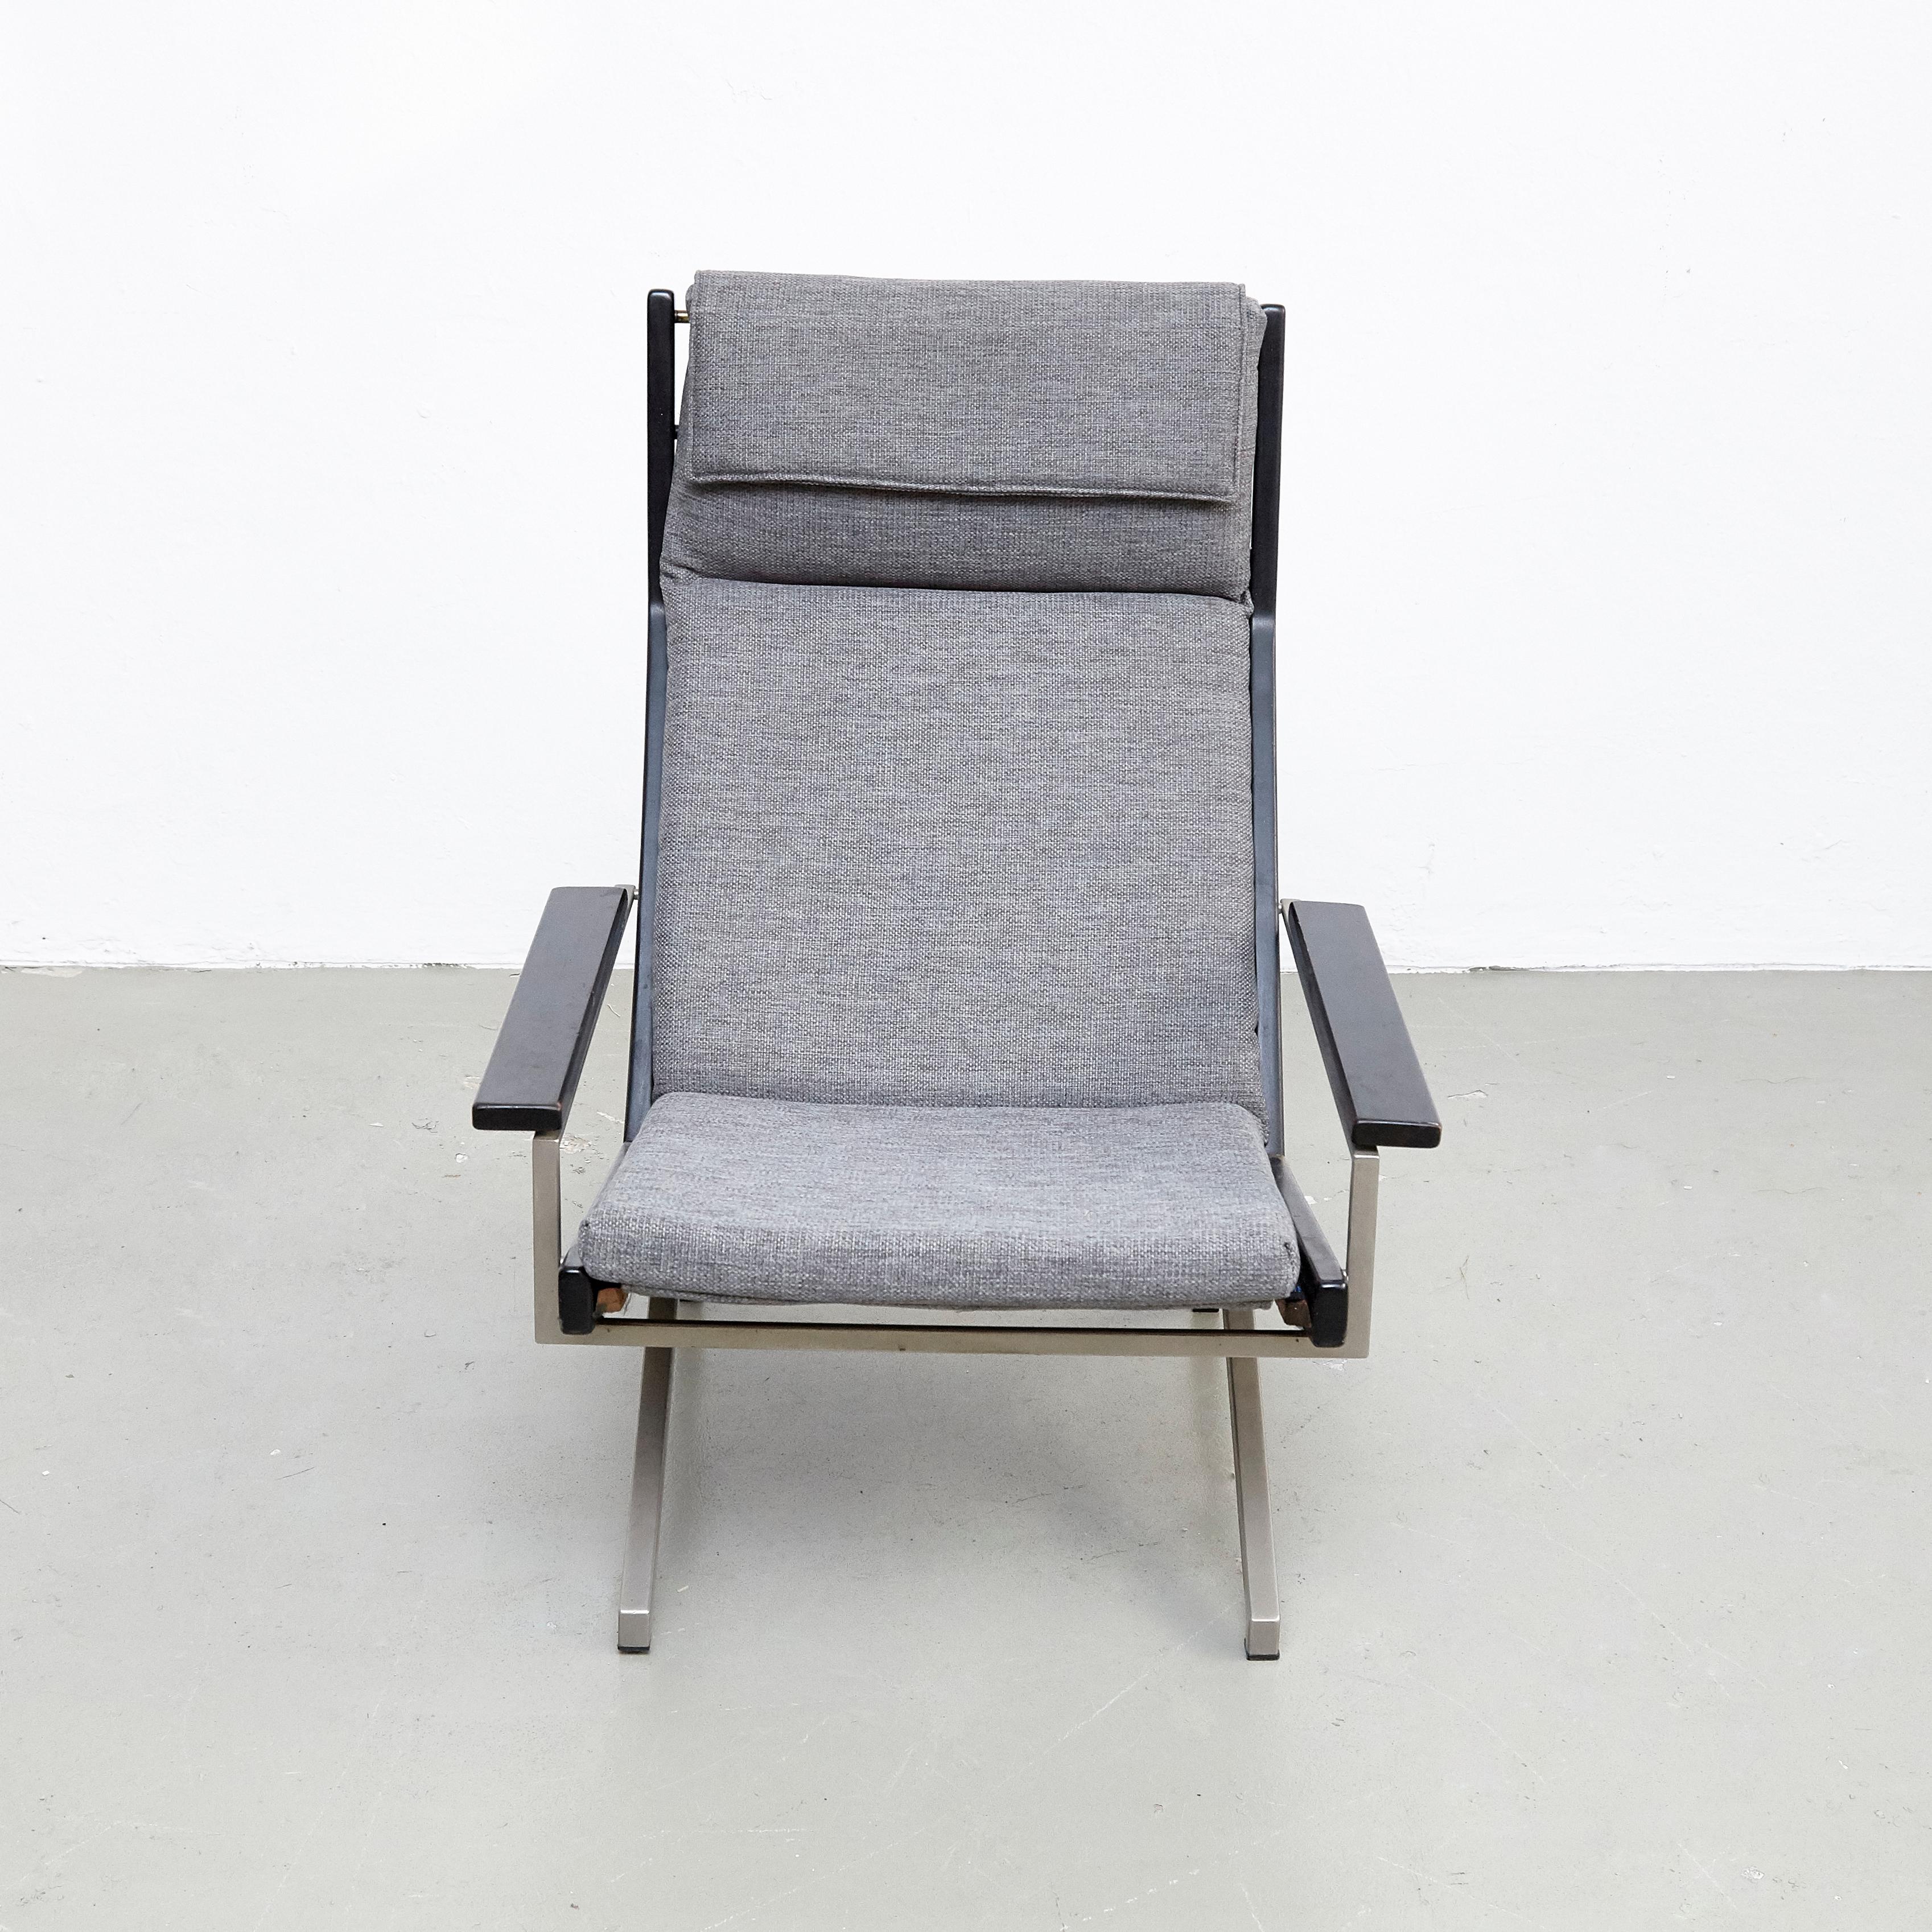 Easy chair designed by Rob Parry, manufactured by Gelderland (Netherlands) circa 1960.

Hand Signed by the Designer in Pen.

The chair has a beautiful steel base, wooden armrests and side panels.
It has been reupholstered.

In good original